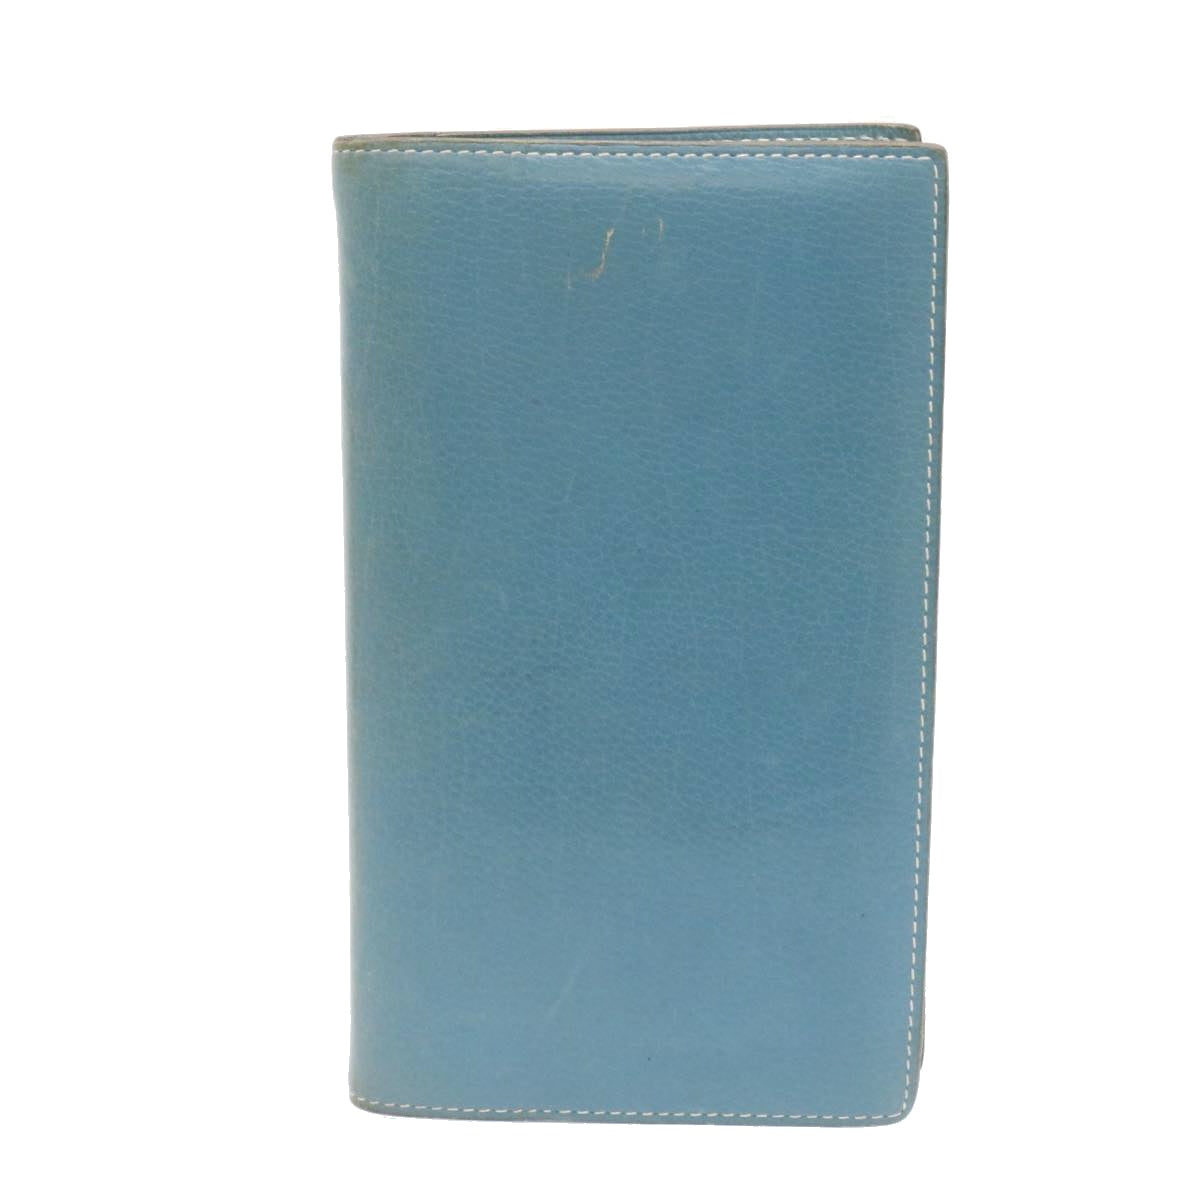 HERMES Notebook Cover Leather Light Blue Auth yk2852 - 0